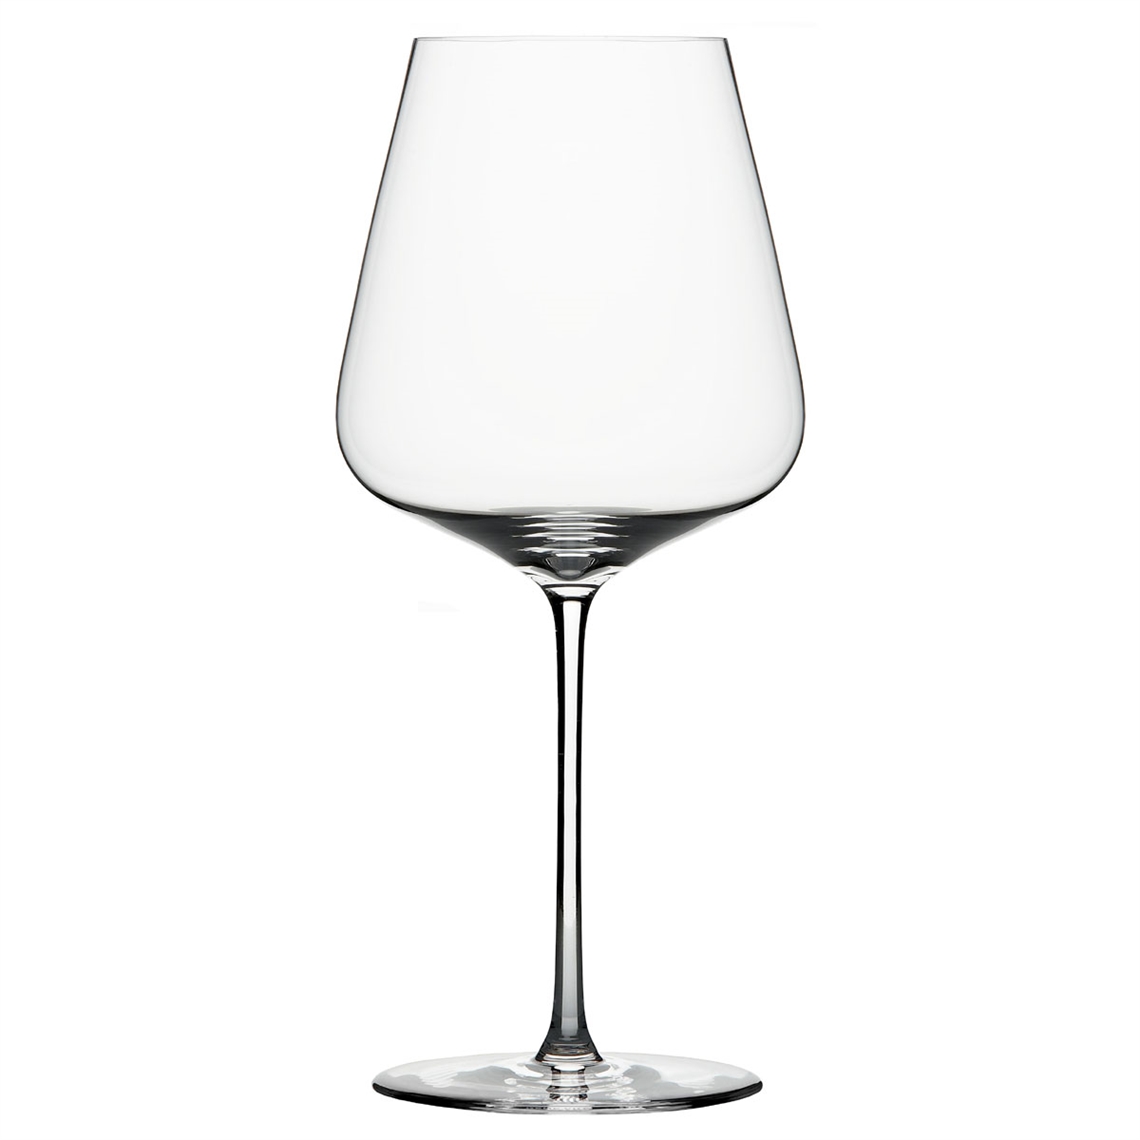 View more red wine glasses from our Premium Mouth Blown Glassware range